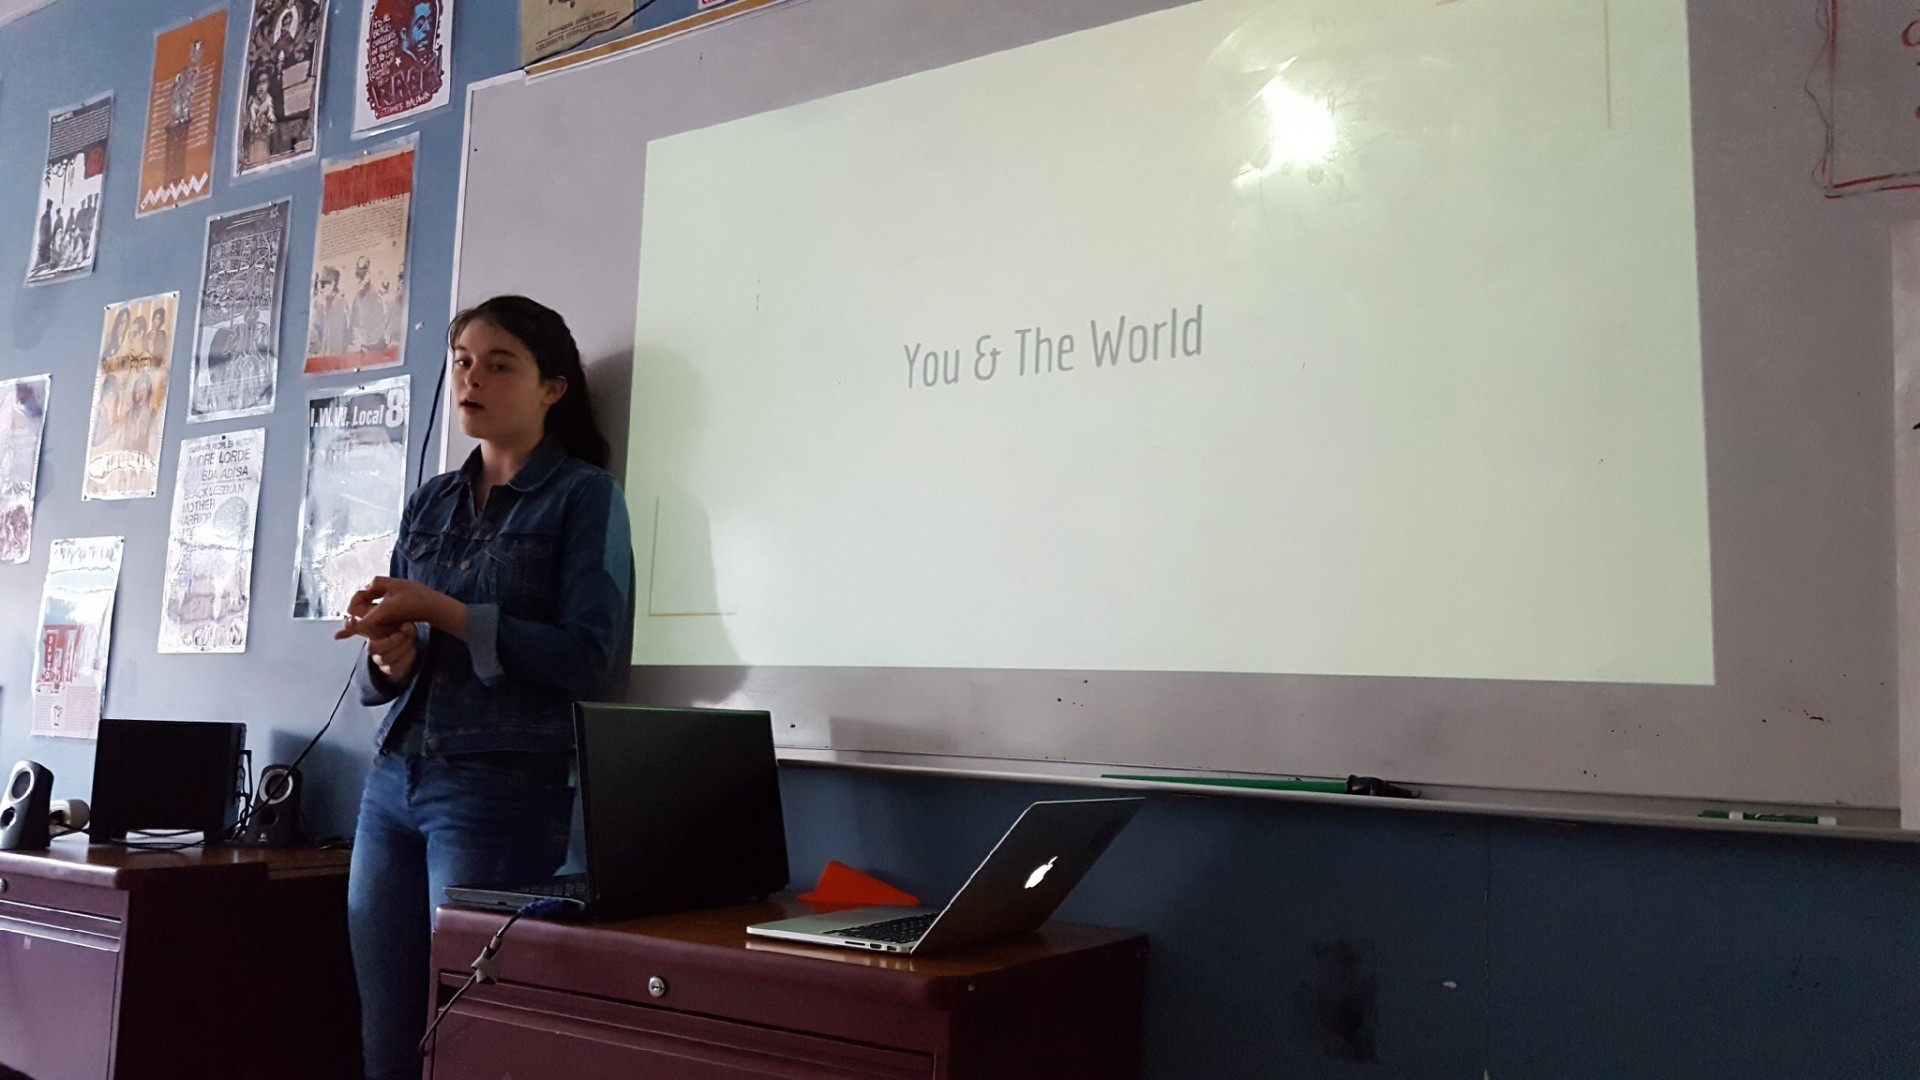 This photo was taken by Nasya Ie during my Agent of Change presentation. It shows me explaining the You & The World project.